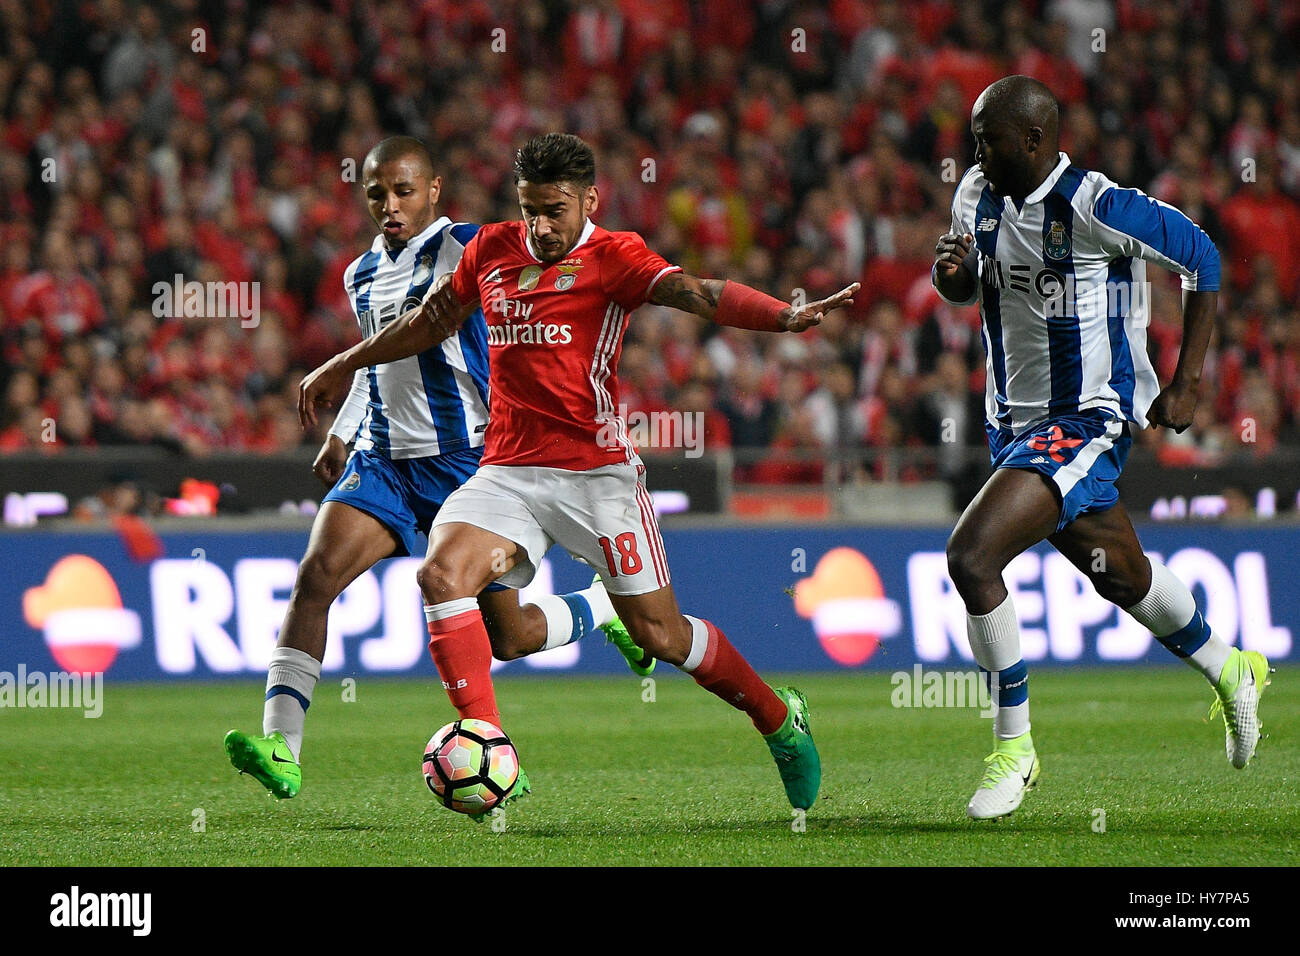 Portugal, Lisbon, April 1, 2017 -  FOOTBALL: PORTUGAL x FC PORTO - Eduardo Salvio #18 BenficaÕs midfielder from Argentina (C) control the ball between Yacine Brahimi #8 PortoÕs midfielder from Algeria (L) and Danilo Pereira #22 PortoÕs midfielder from Portugal (R) during Portuguese First League football match between SL Benfica and FC Porto in Luz Stadium on April 1, 2017 in Lisbon, Portugal. Photo: Bruno de Carvalho / Alamy Stock Photo